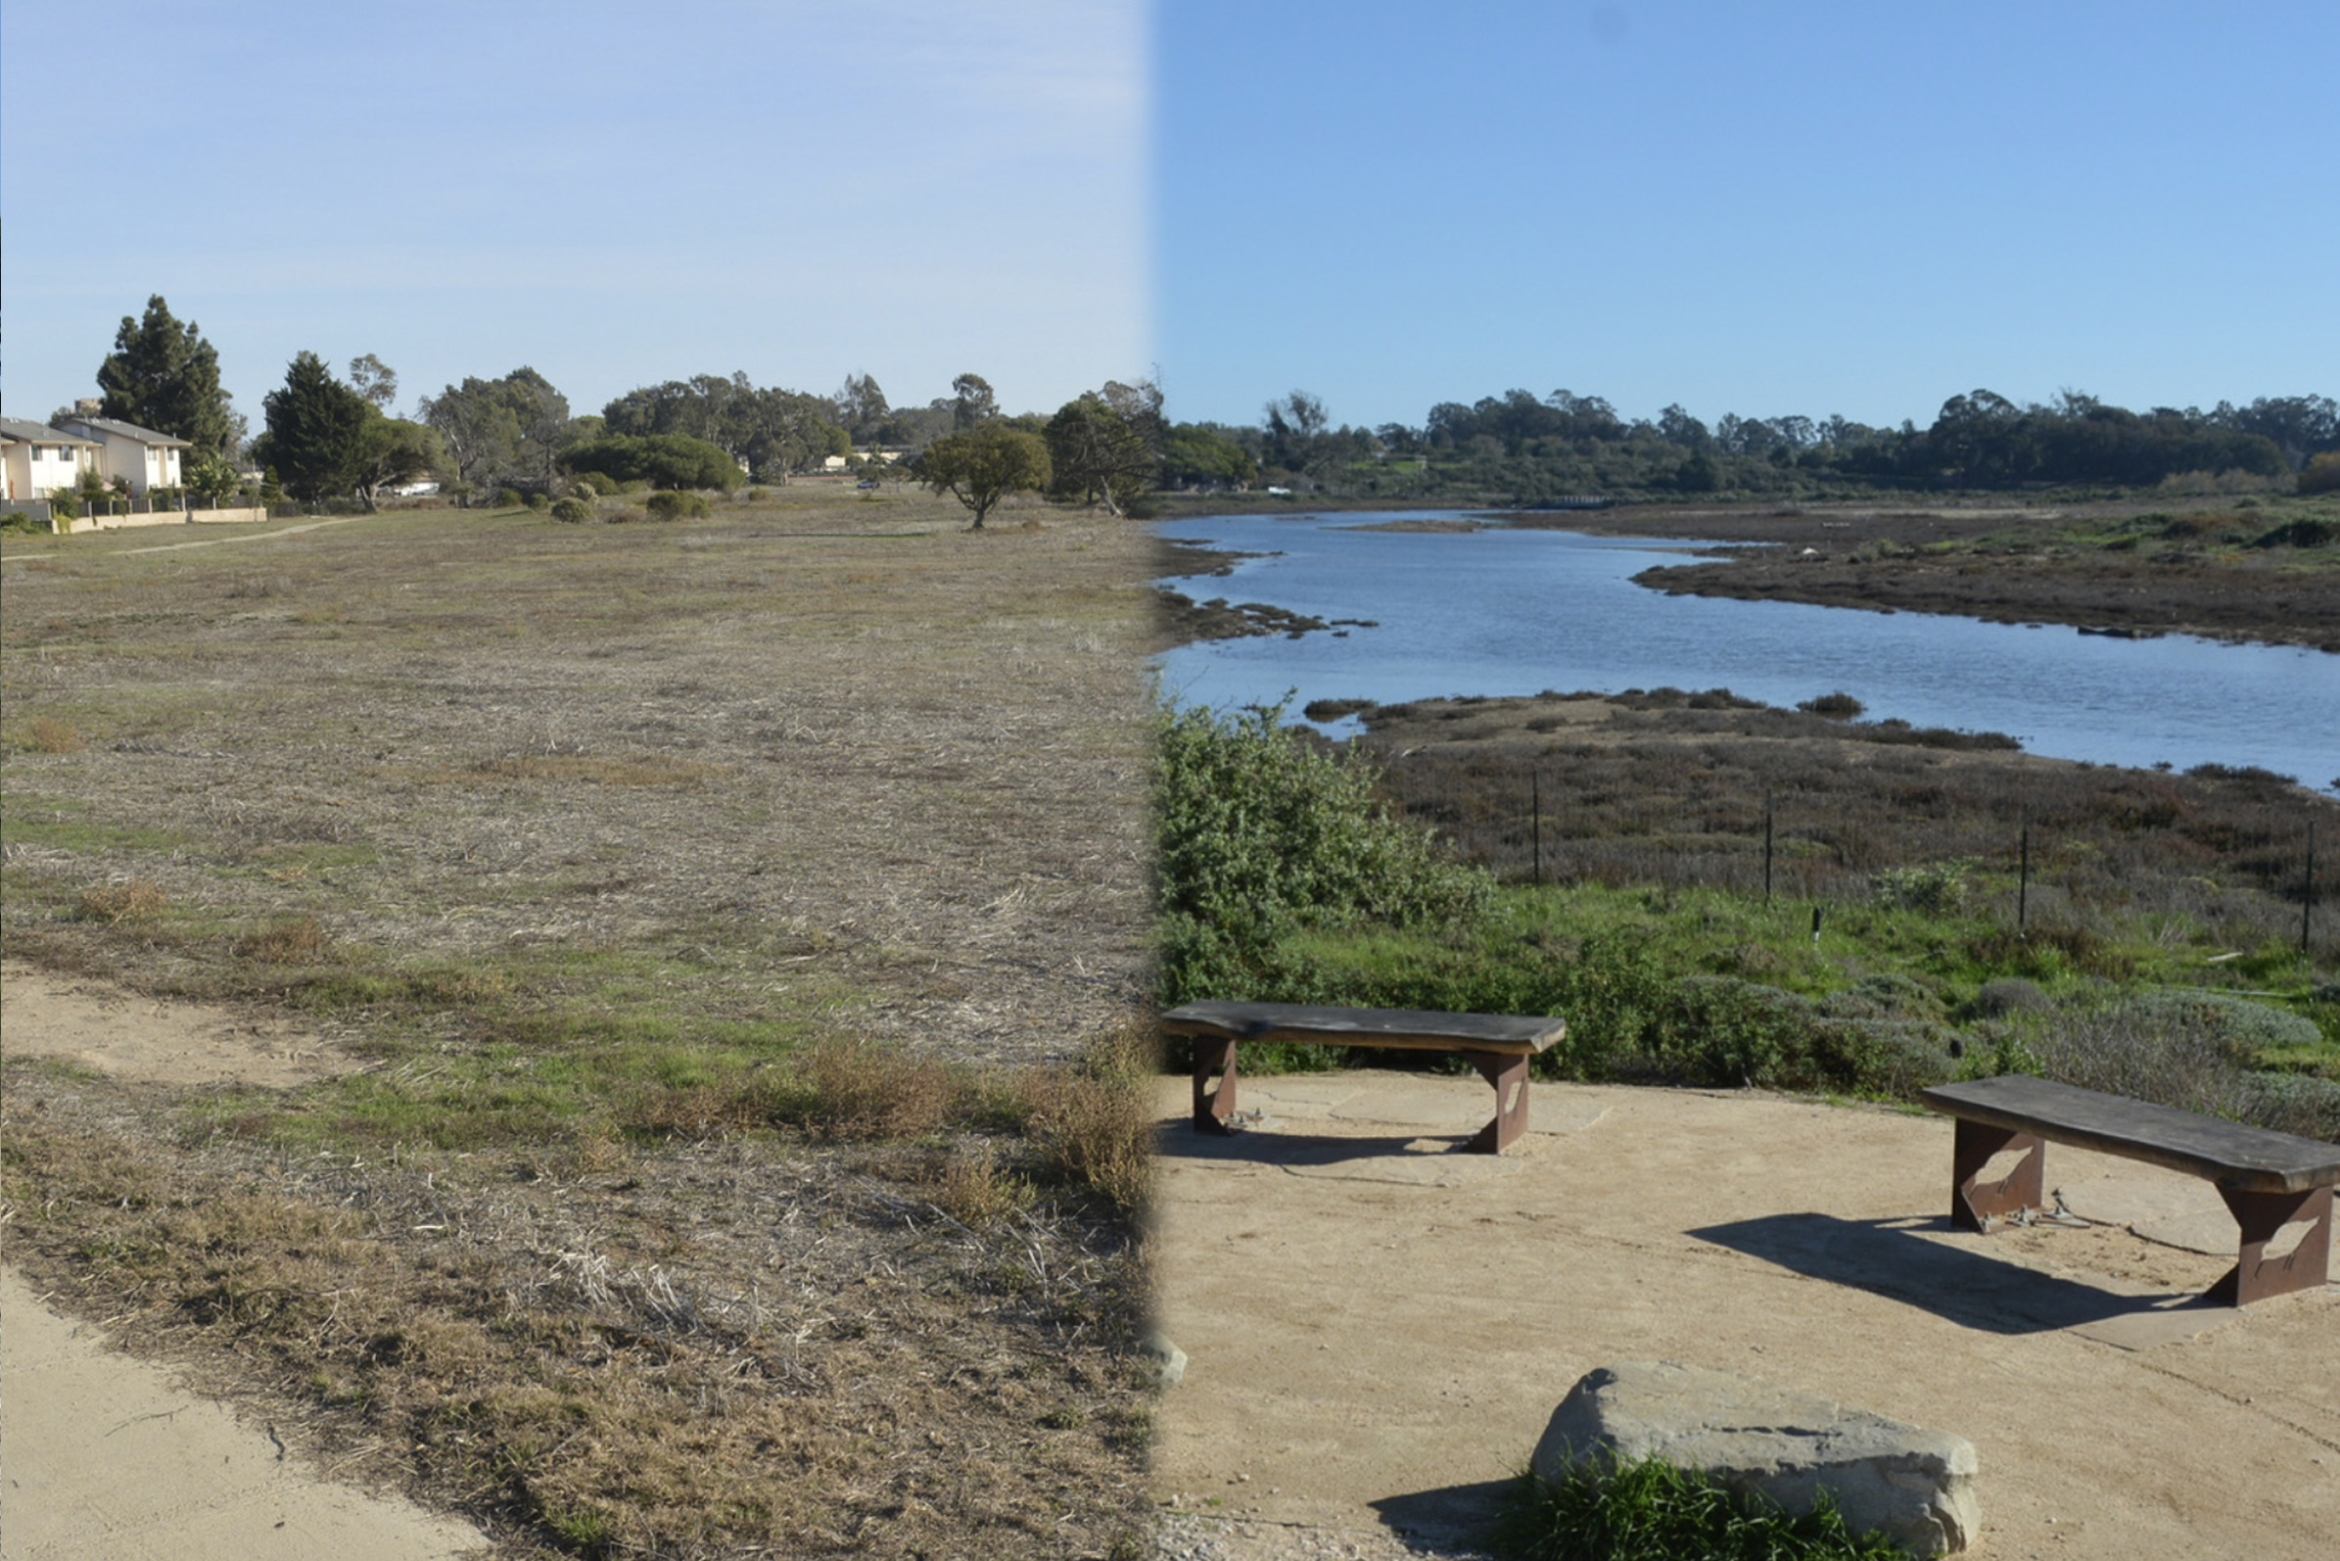 A side-by-side comparison of the North Campus Open Space, before and after the restoration